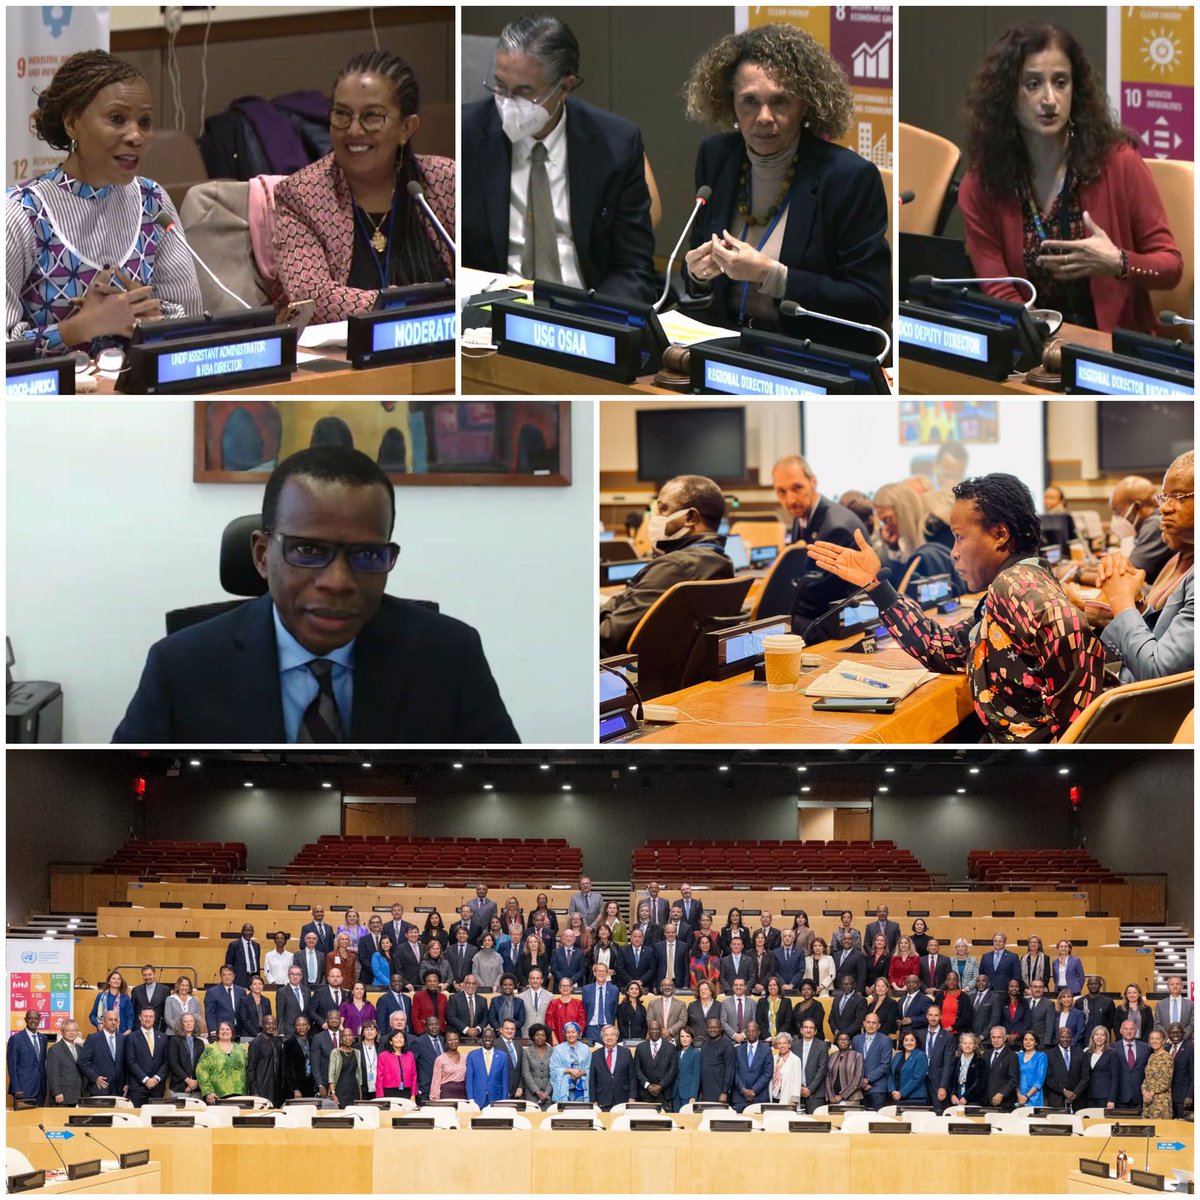 Our duty as @UN leaders is to identify opportunities & invest in agency. Together w/ @Duarte_UNOSAA, @RKalapurakal &others, I led a thought-provoking discussion w/ Resident Coordinators across #Africa. Working as #OneUN is our strength to spark transformative change.